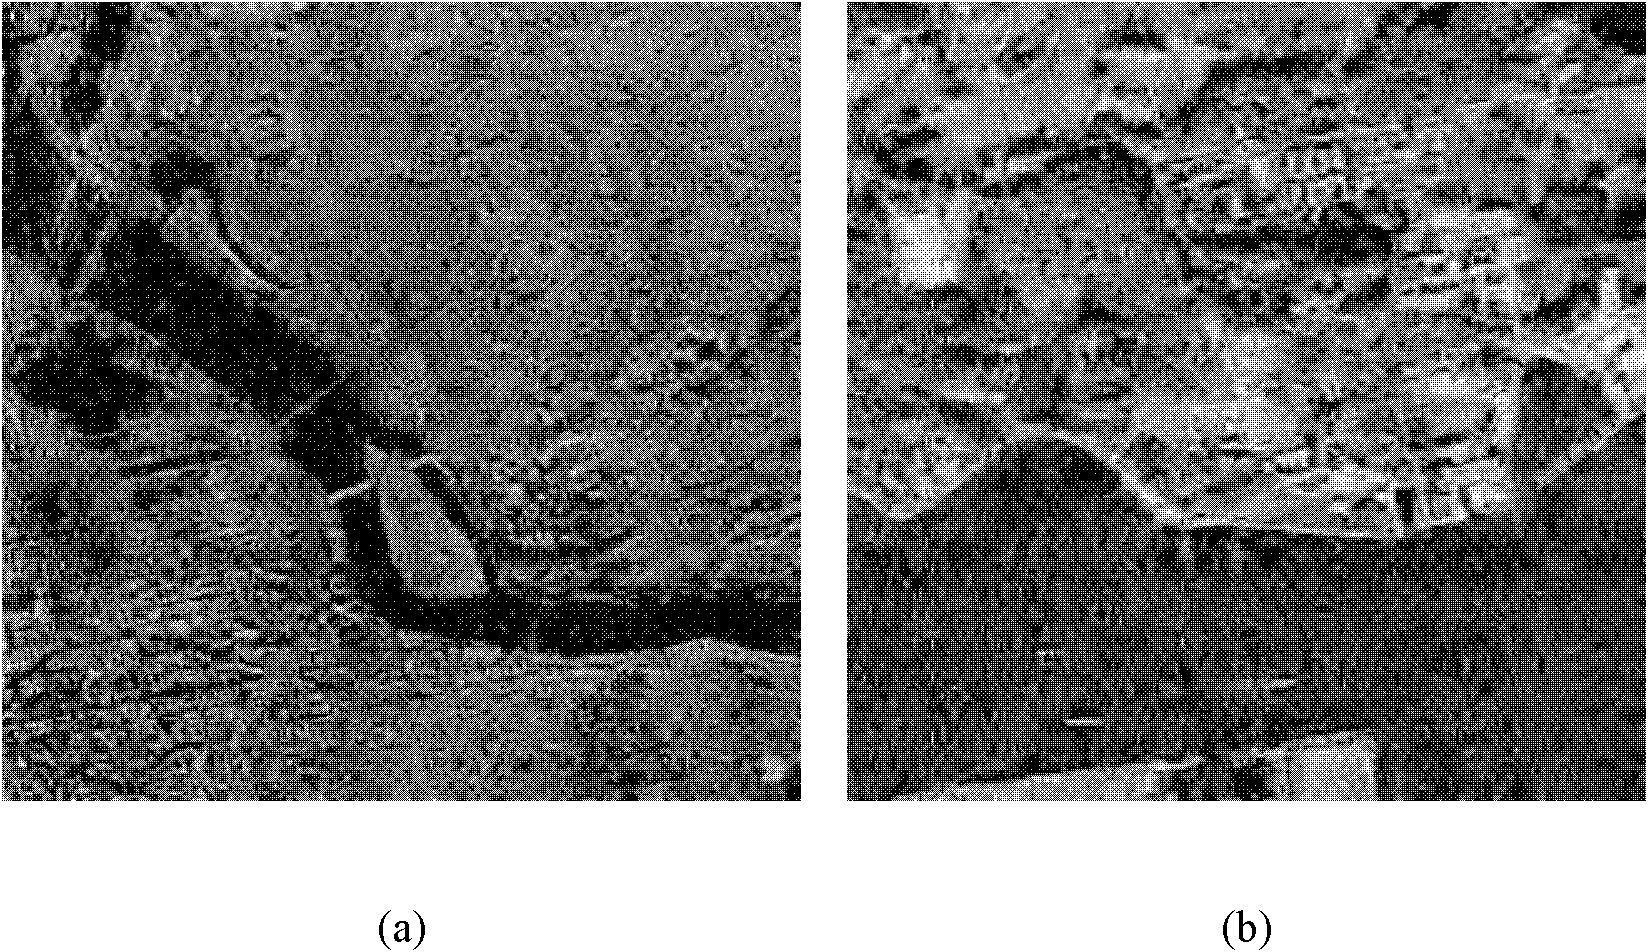 Compressed learning perception based SAR (Synthetic Aperture Radar) high-resolution image reconstruction method